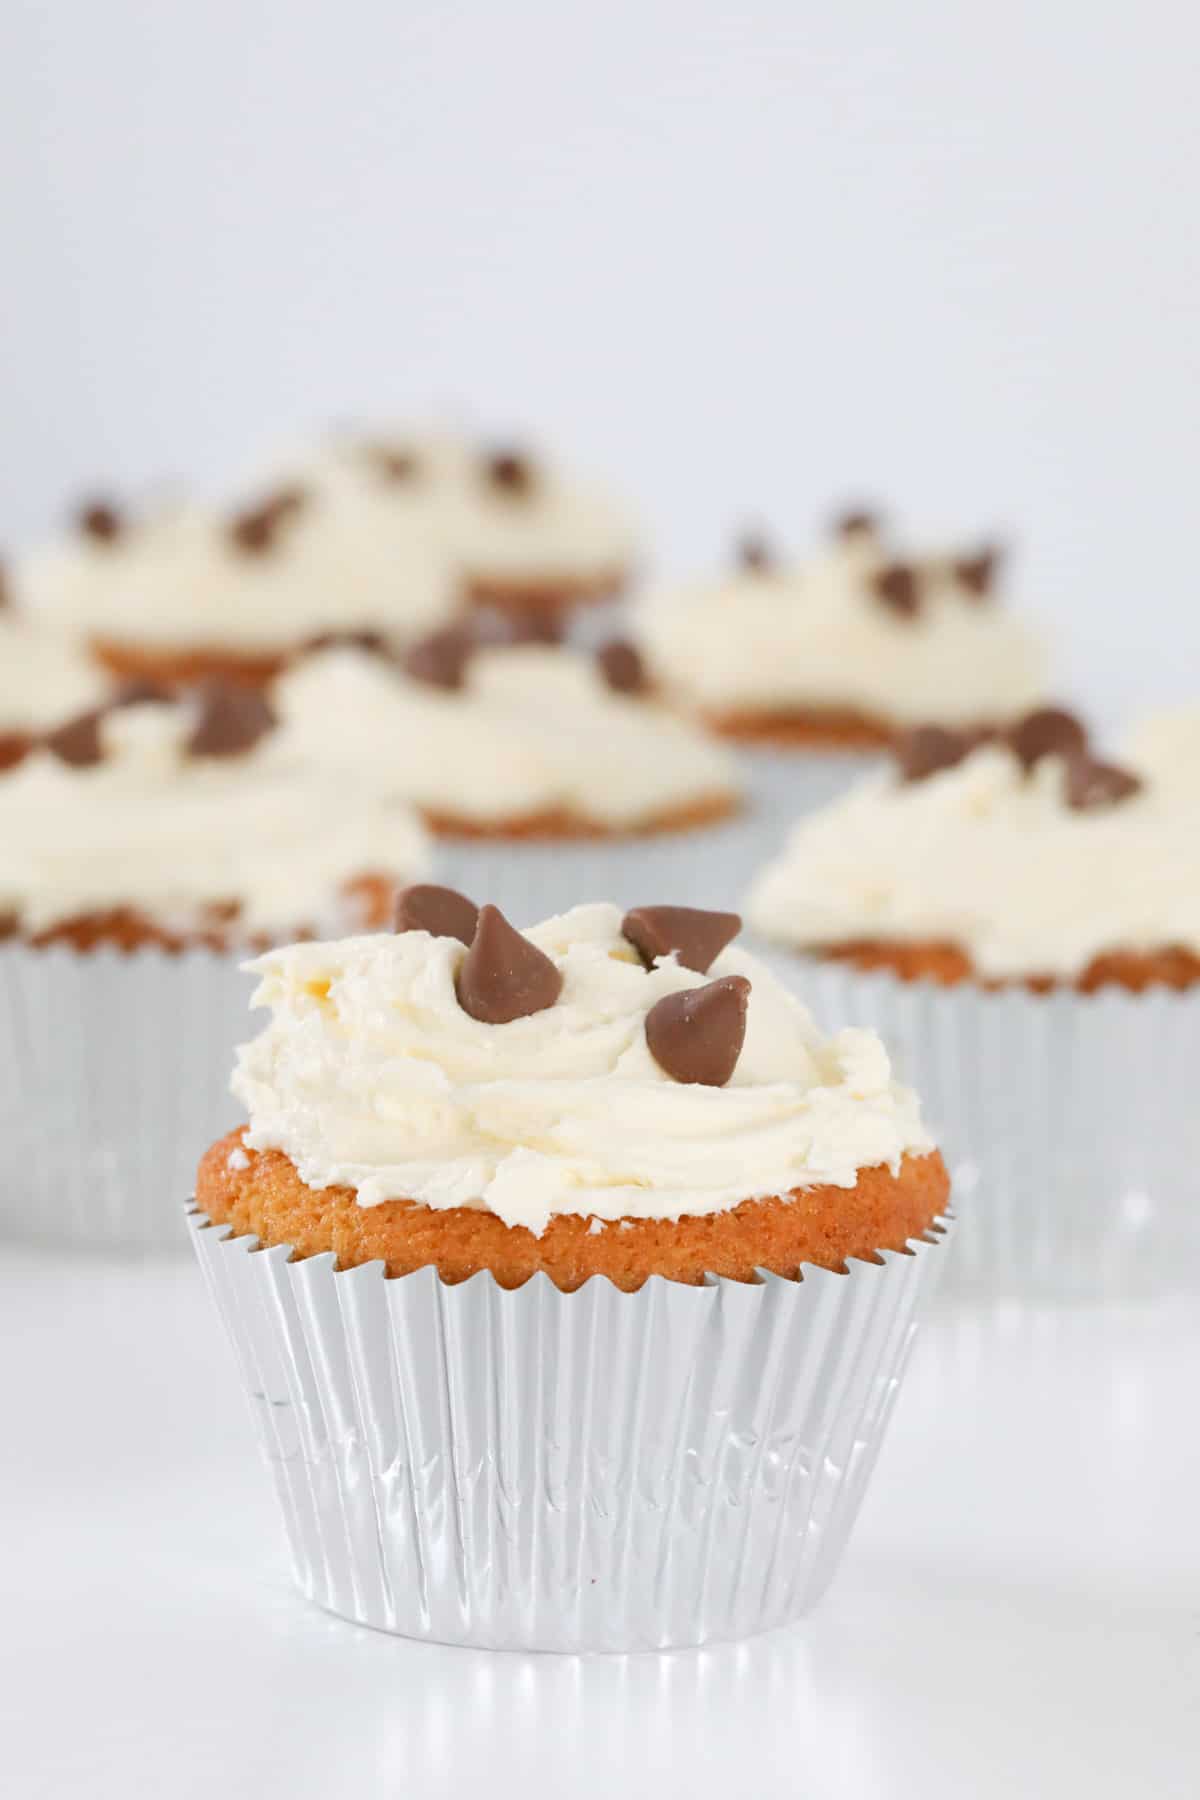 Chocolate chip cupcakes in silver cases.